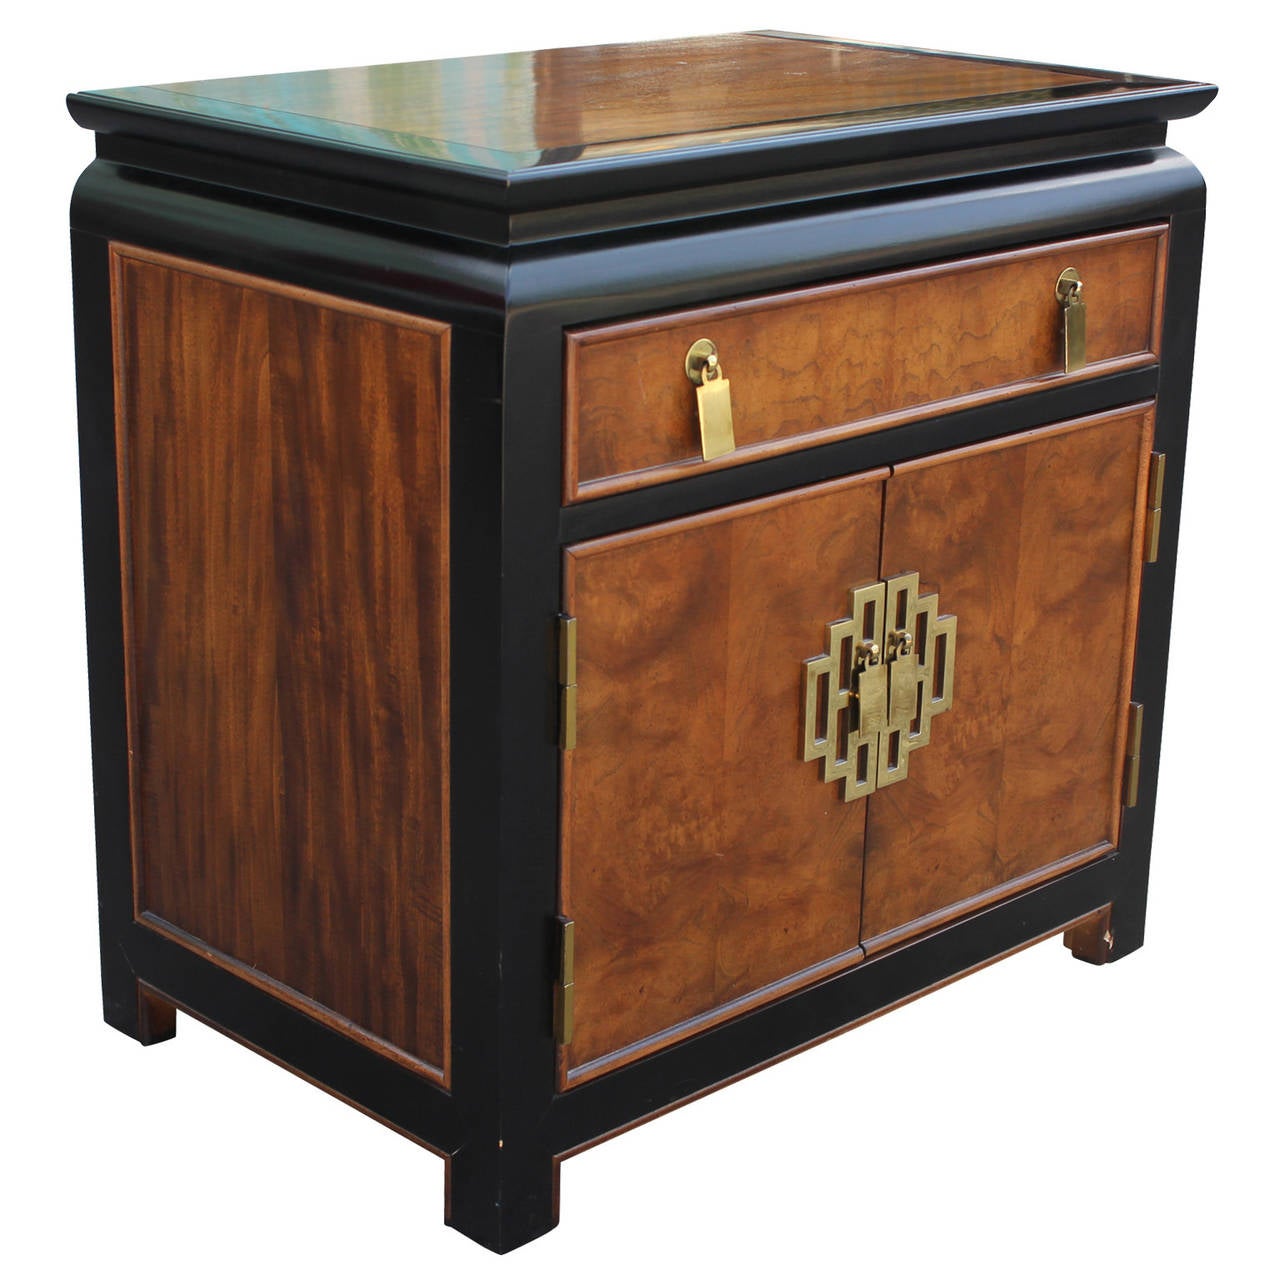 Wonderful pair of two-tone night stands or small chests Century Furniture Company. High gloss finish. Geometric brass hardware gives the piece an Asian look. Great as end tables or night stands. Excellent vintage condition. Retains labels.